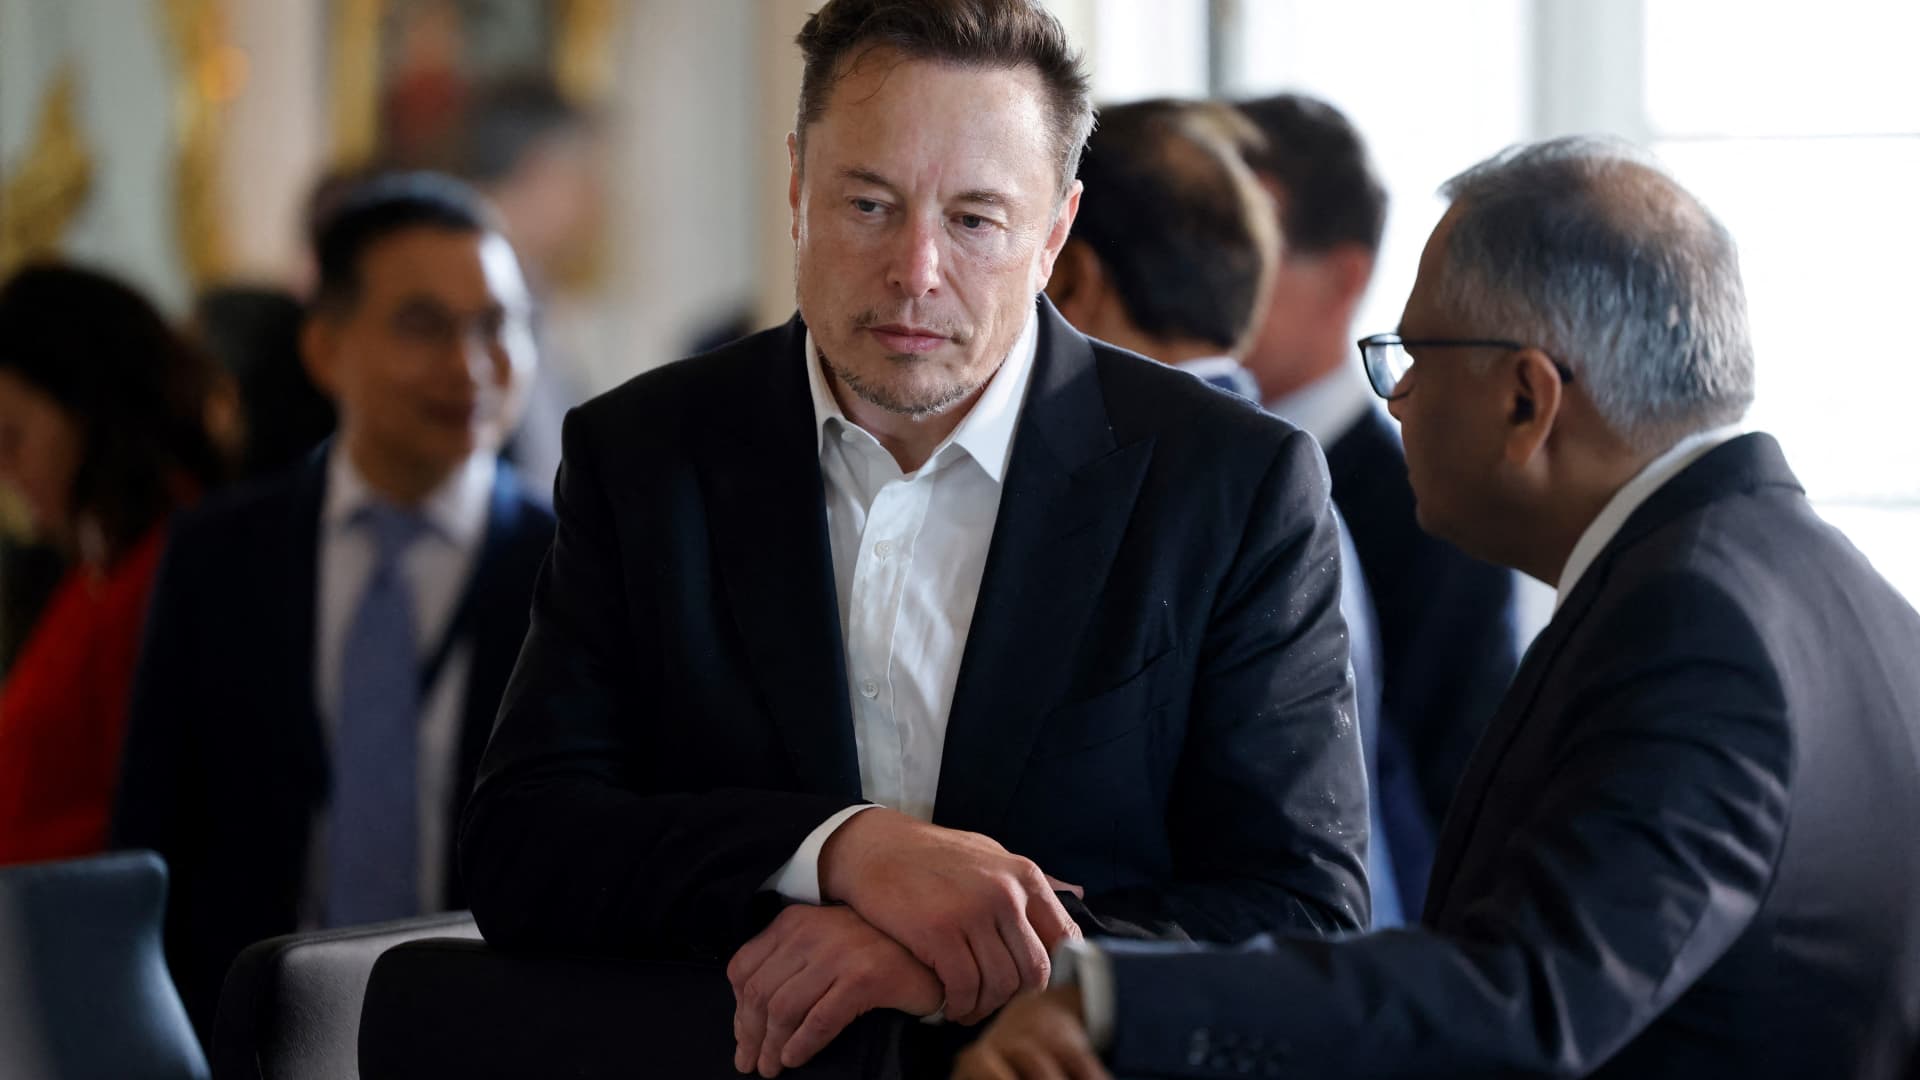 Elon Musk, CEO of Tesla, says in an email that he must approve all hires